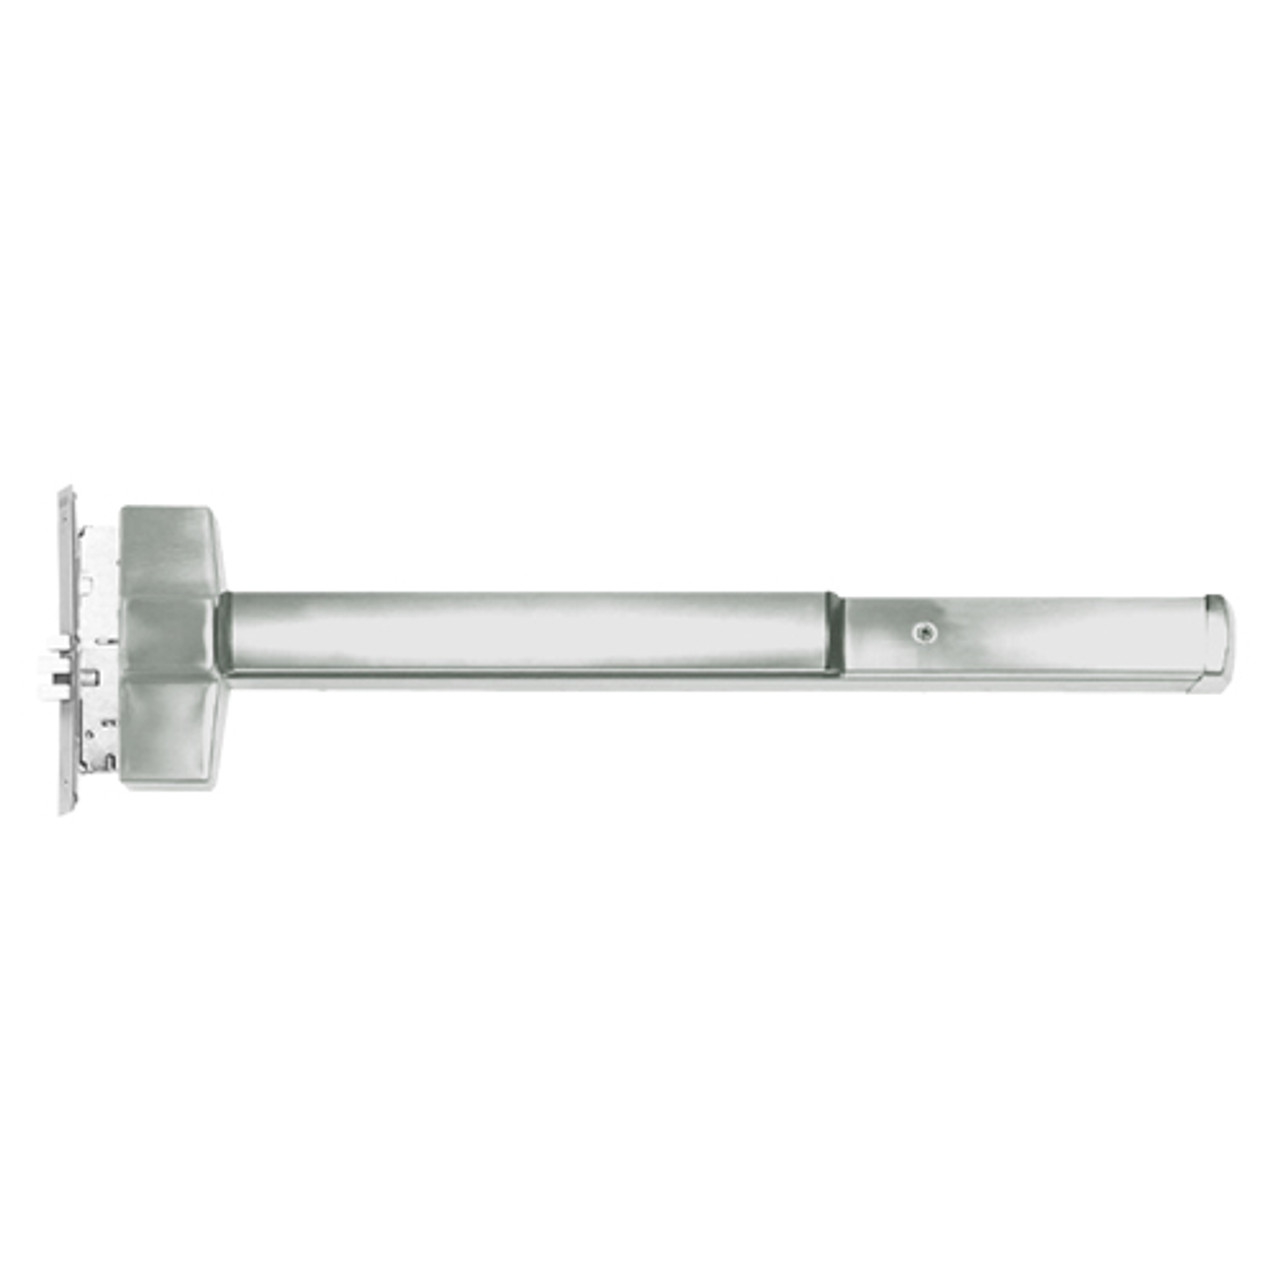 ED5600LD-619-RHR Corbin ED5600 Series Non Fire Rated Mortise Exit Device with Delayed Egress in Satin Nickel Finish